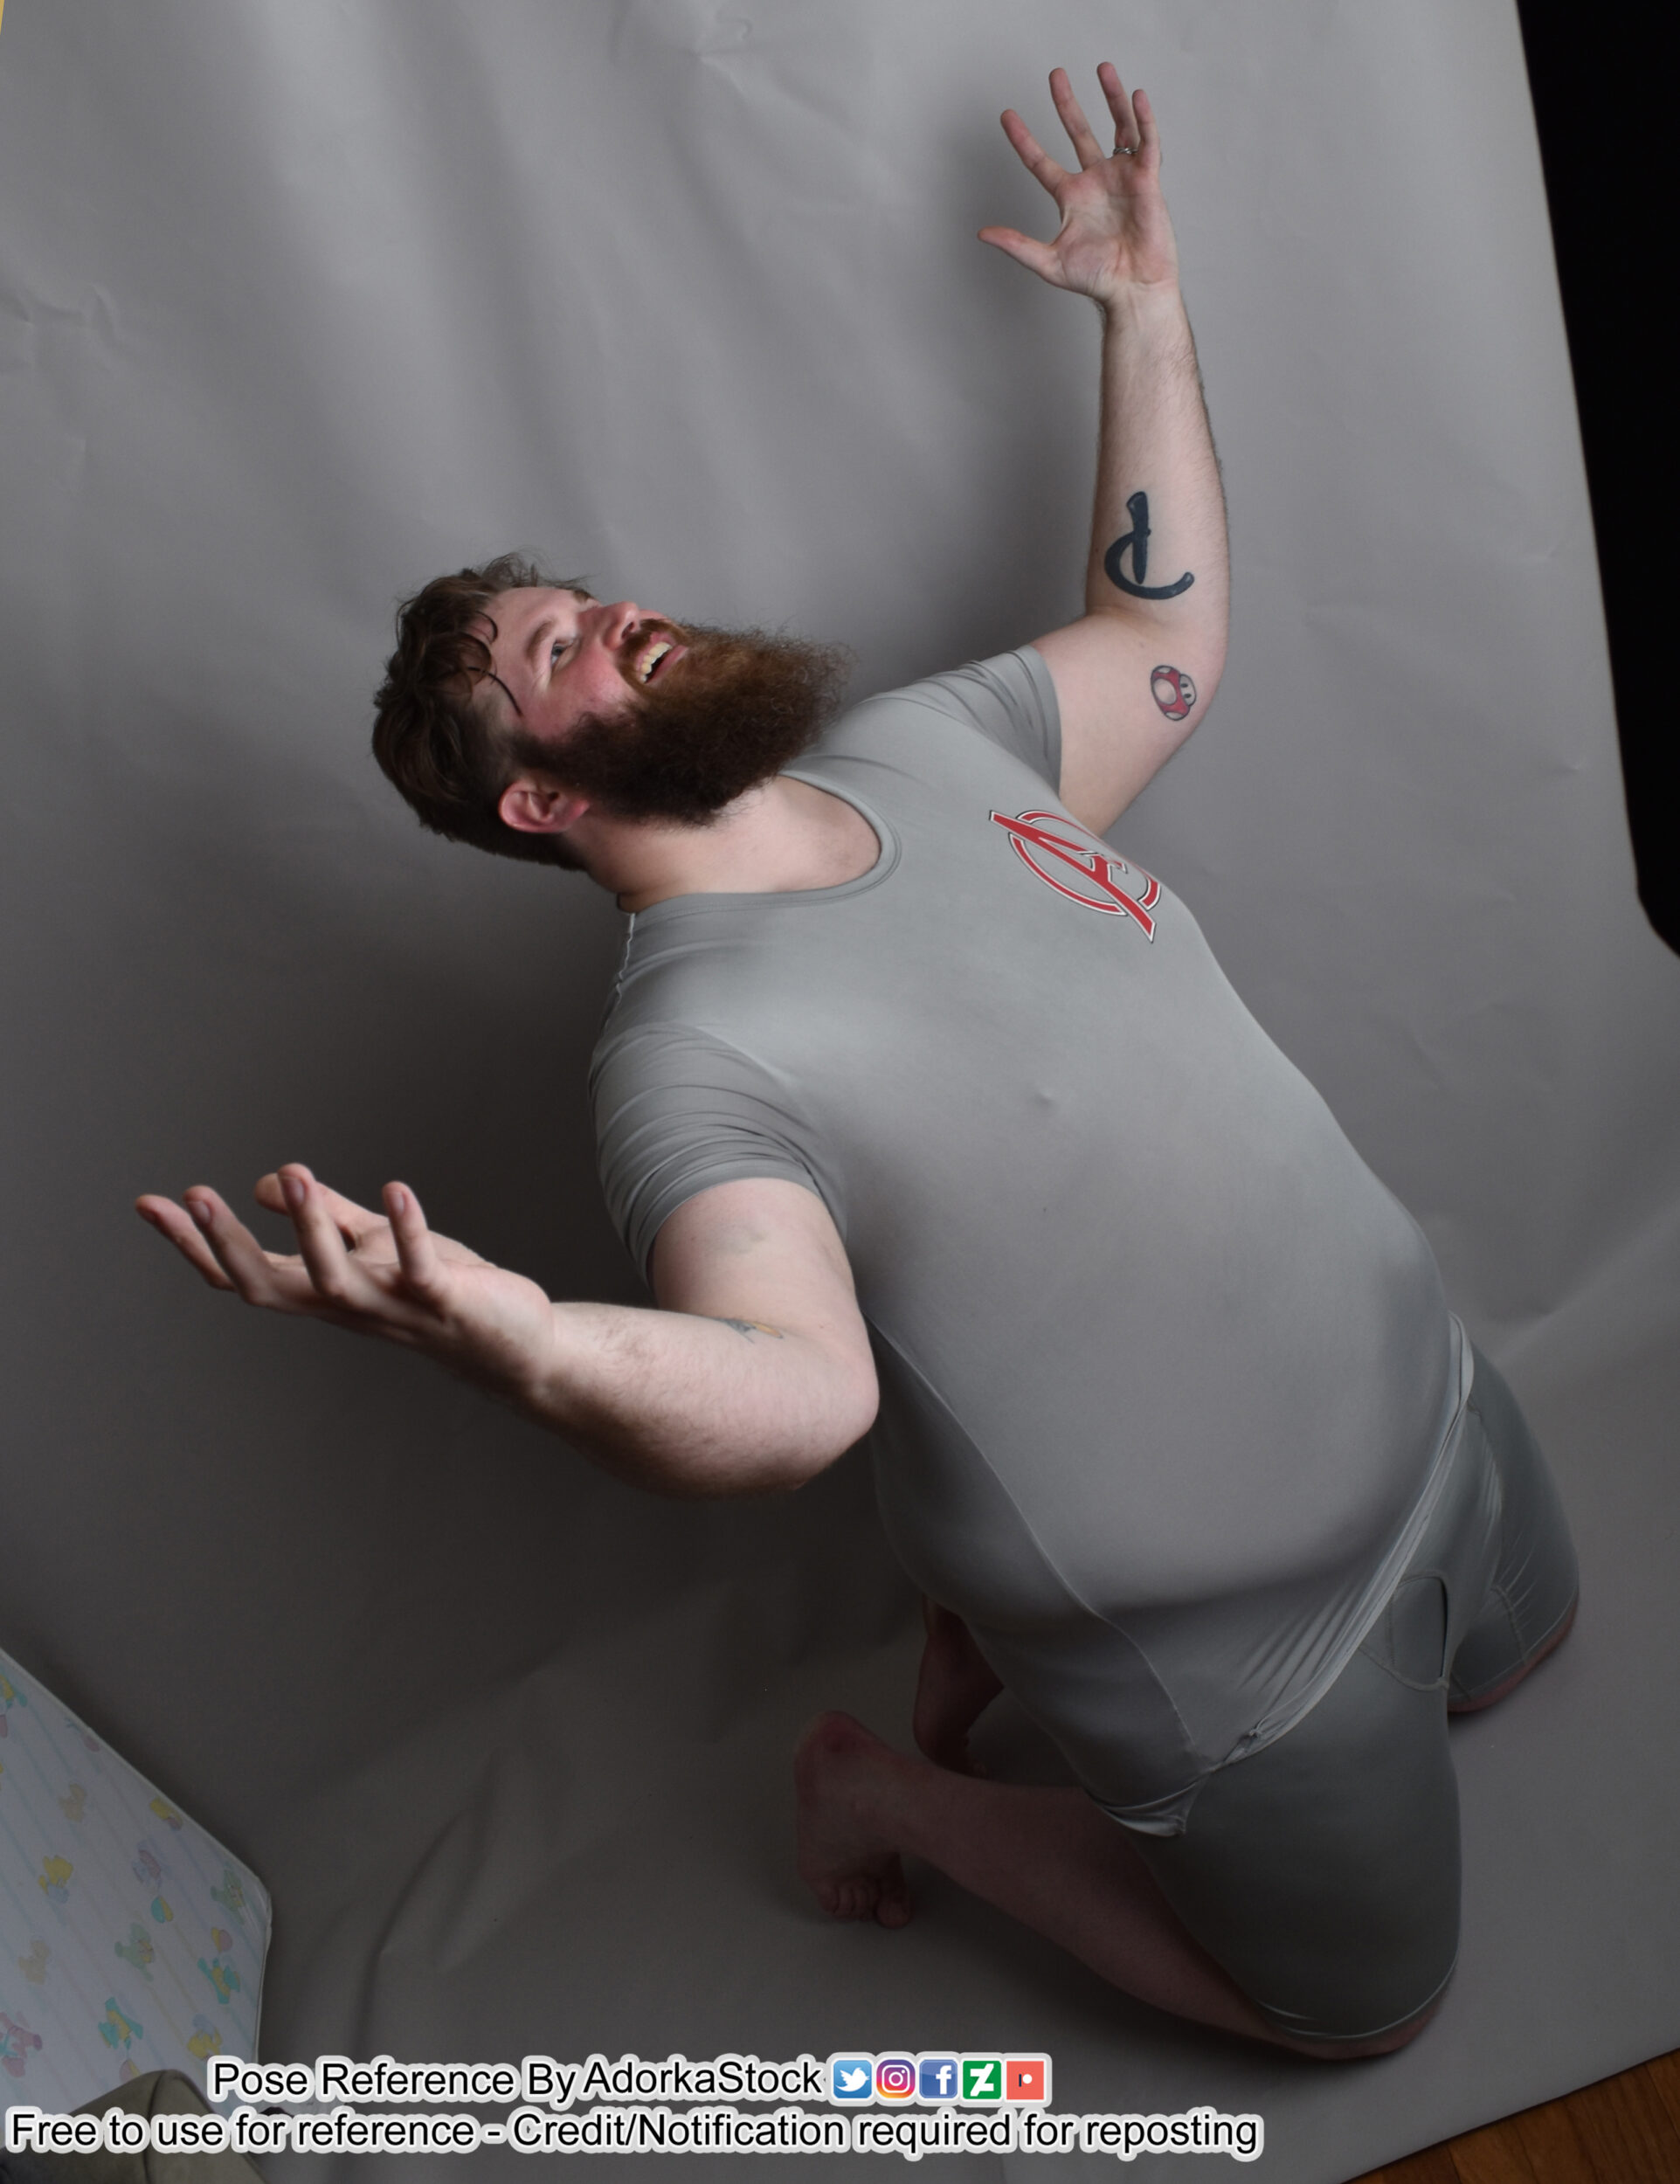 Fat male pose reference model kneeling with arms raised high perspectives